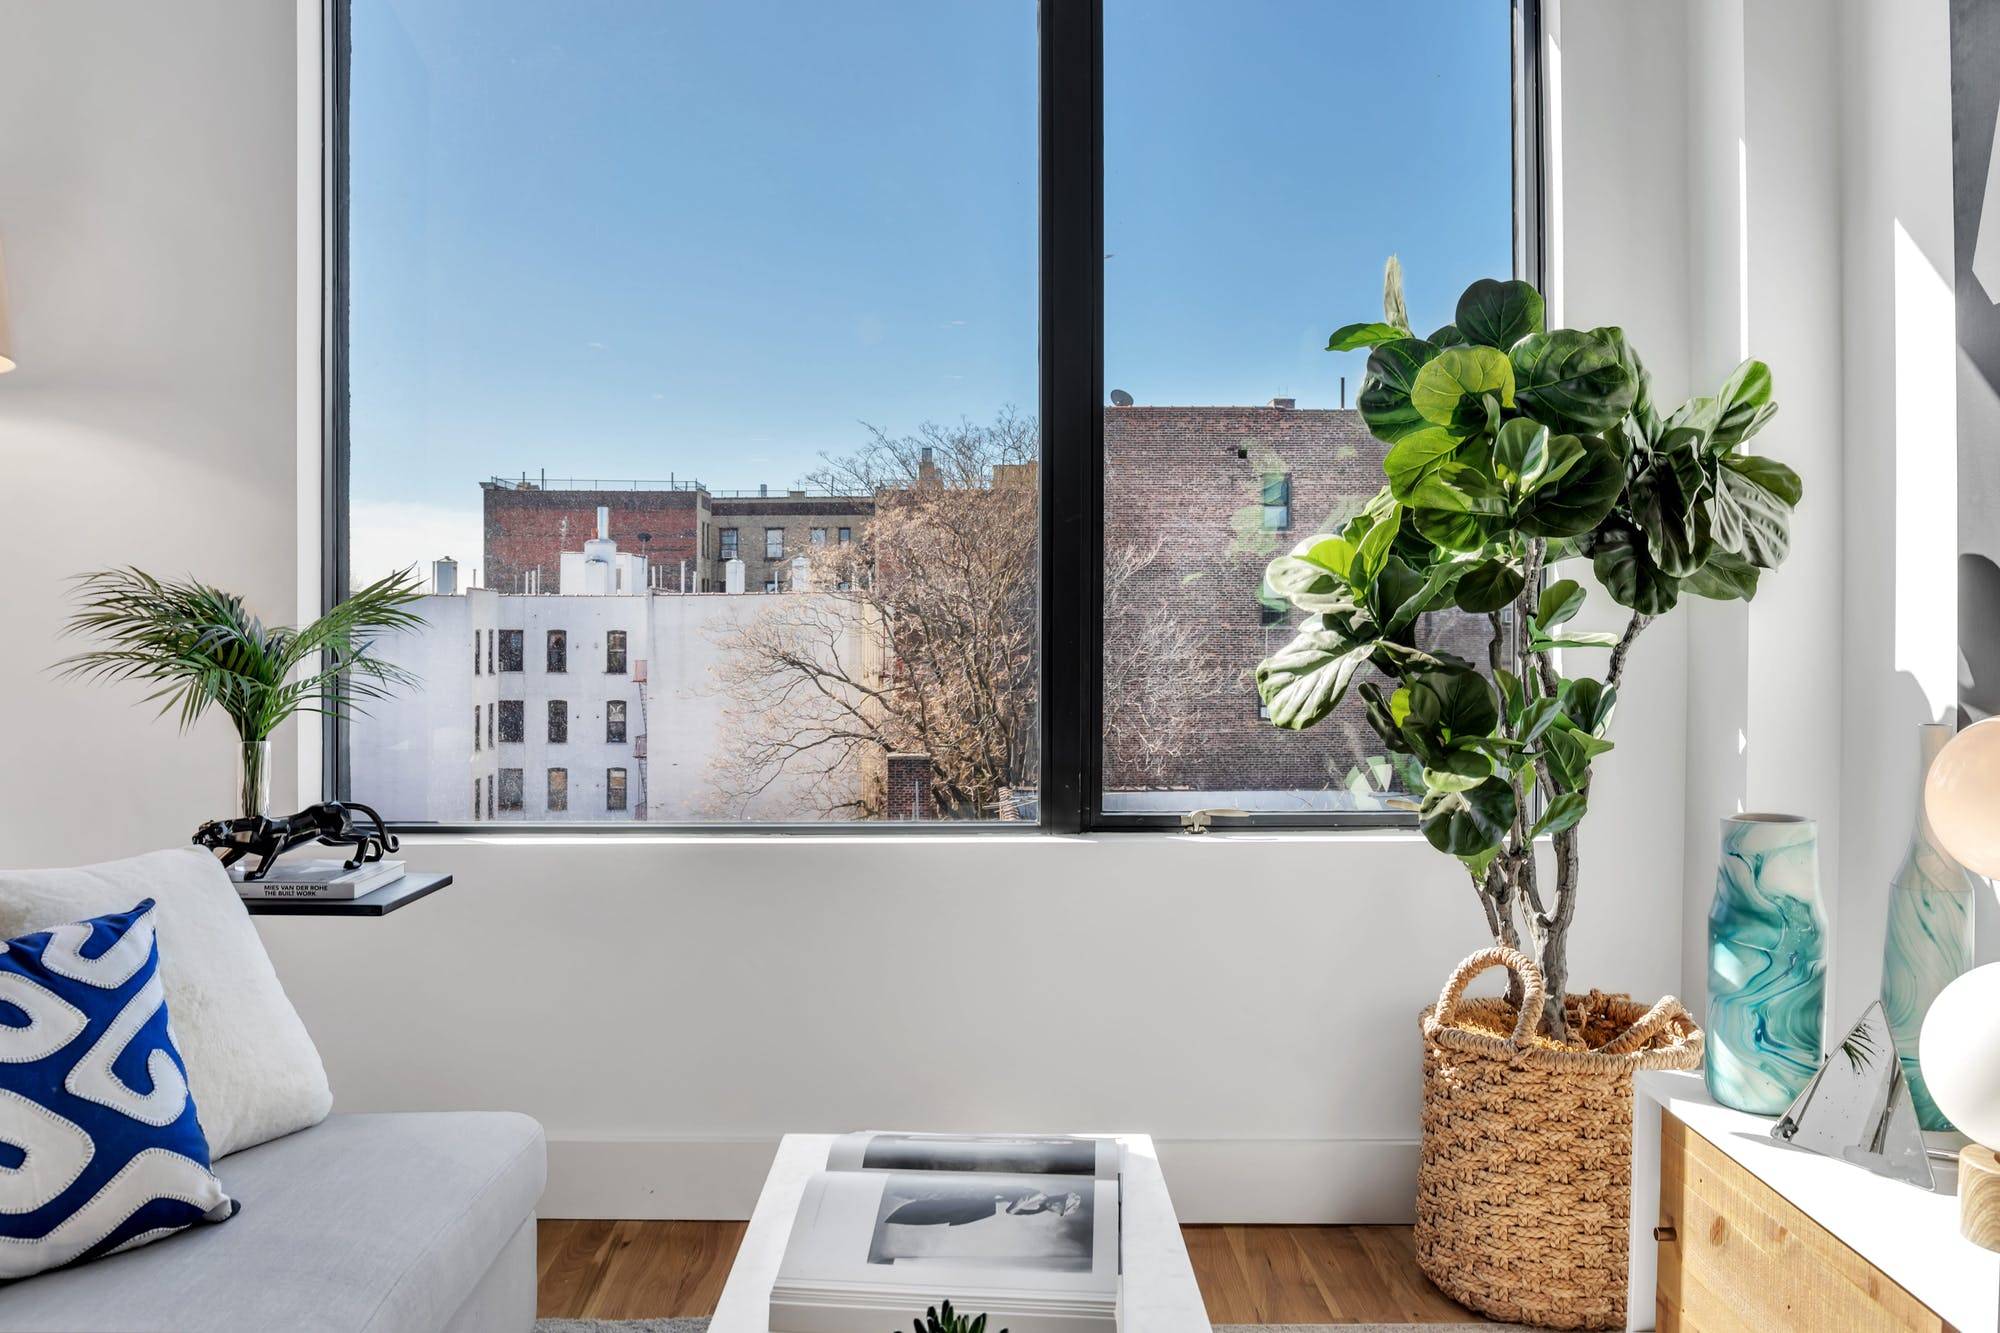 Design favors the bold at the unexpected lofts of 515 Ocean Avenue.